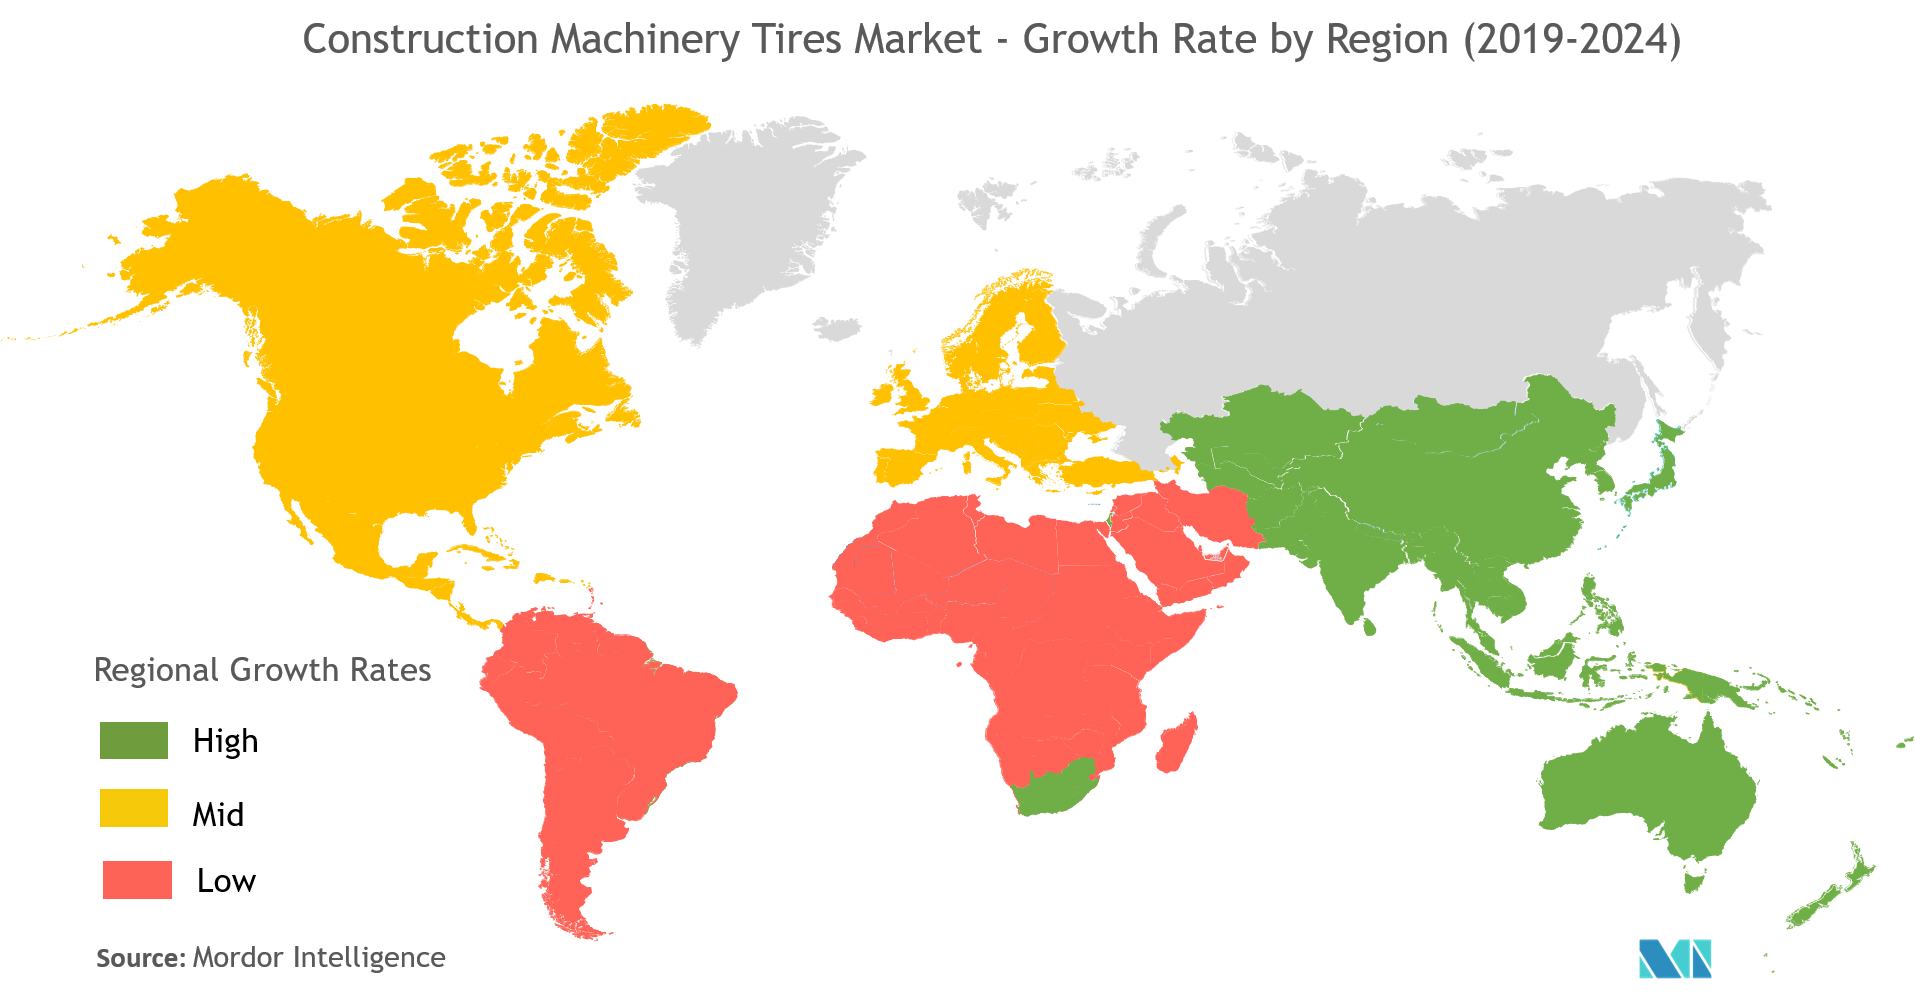 Construction Machinery Tires Market - Growth Rate by Region (2019-2024)